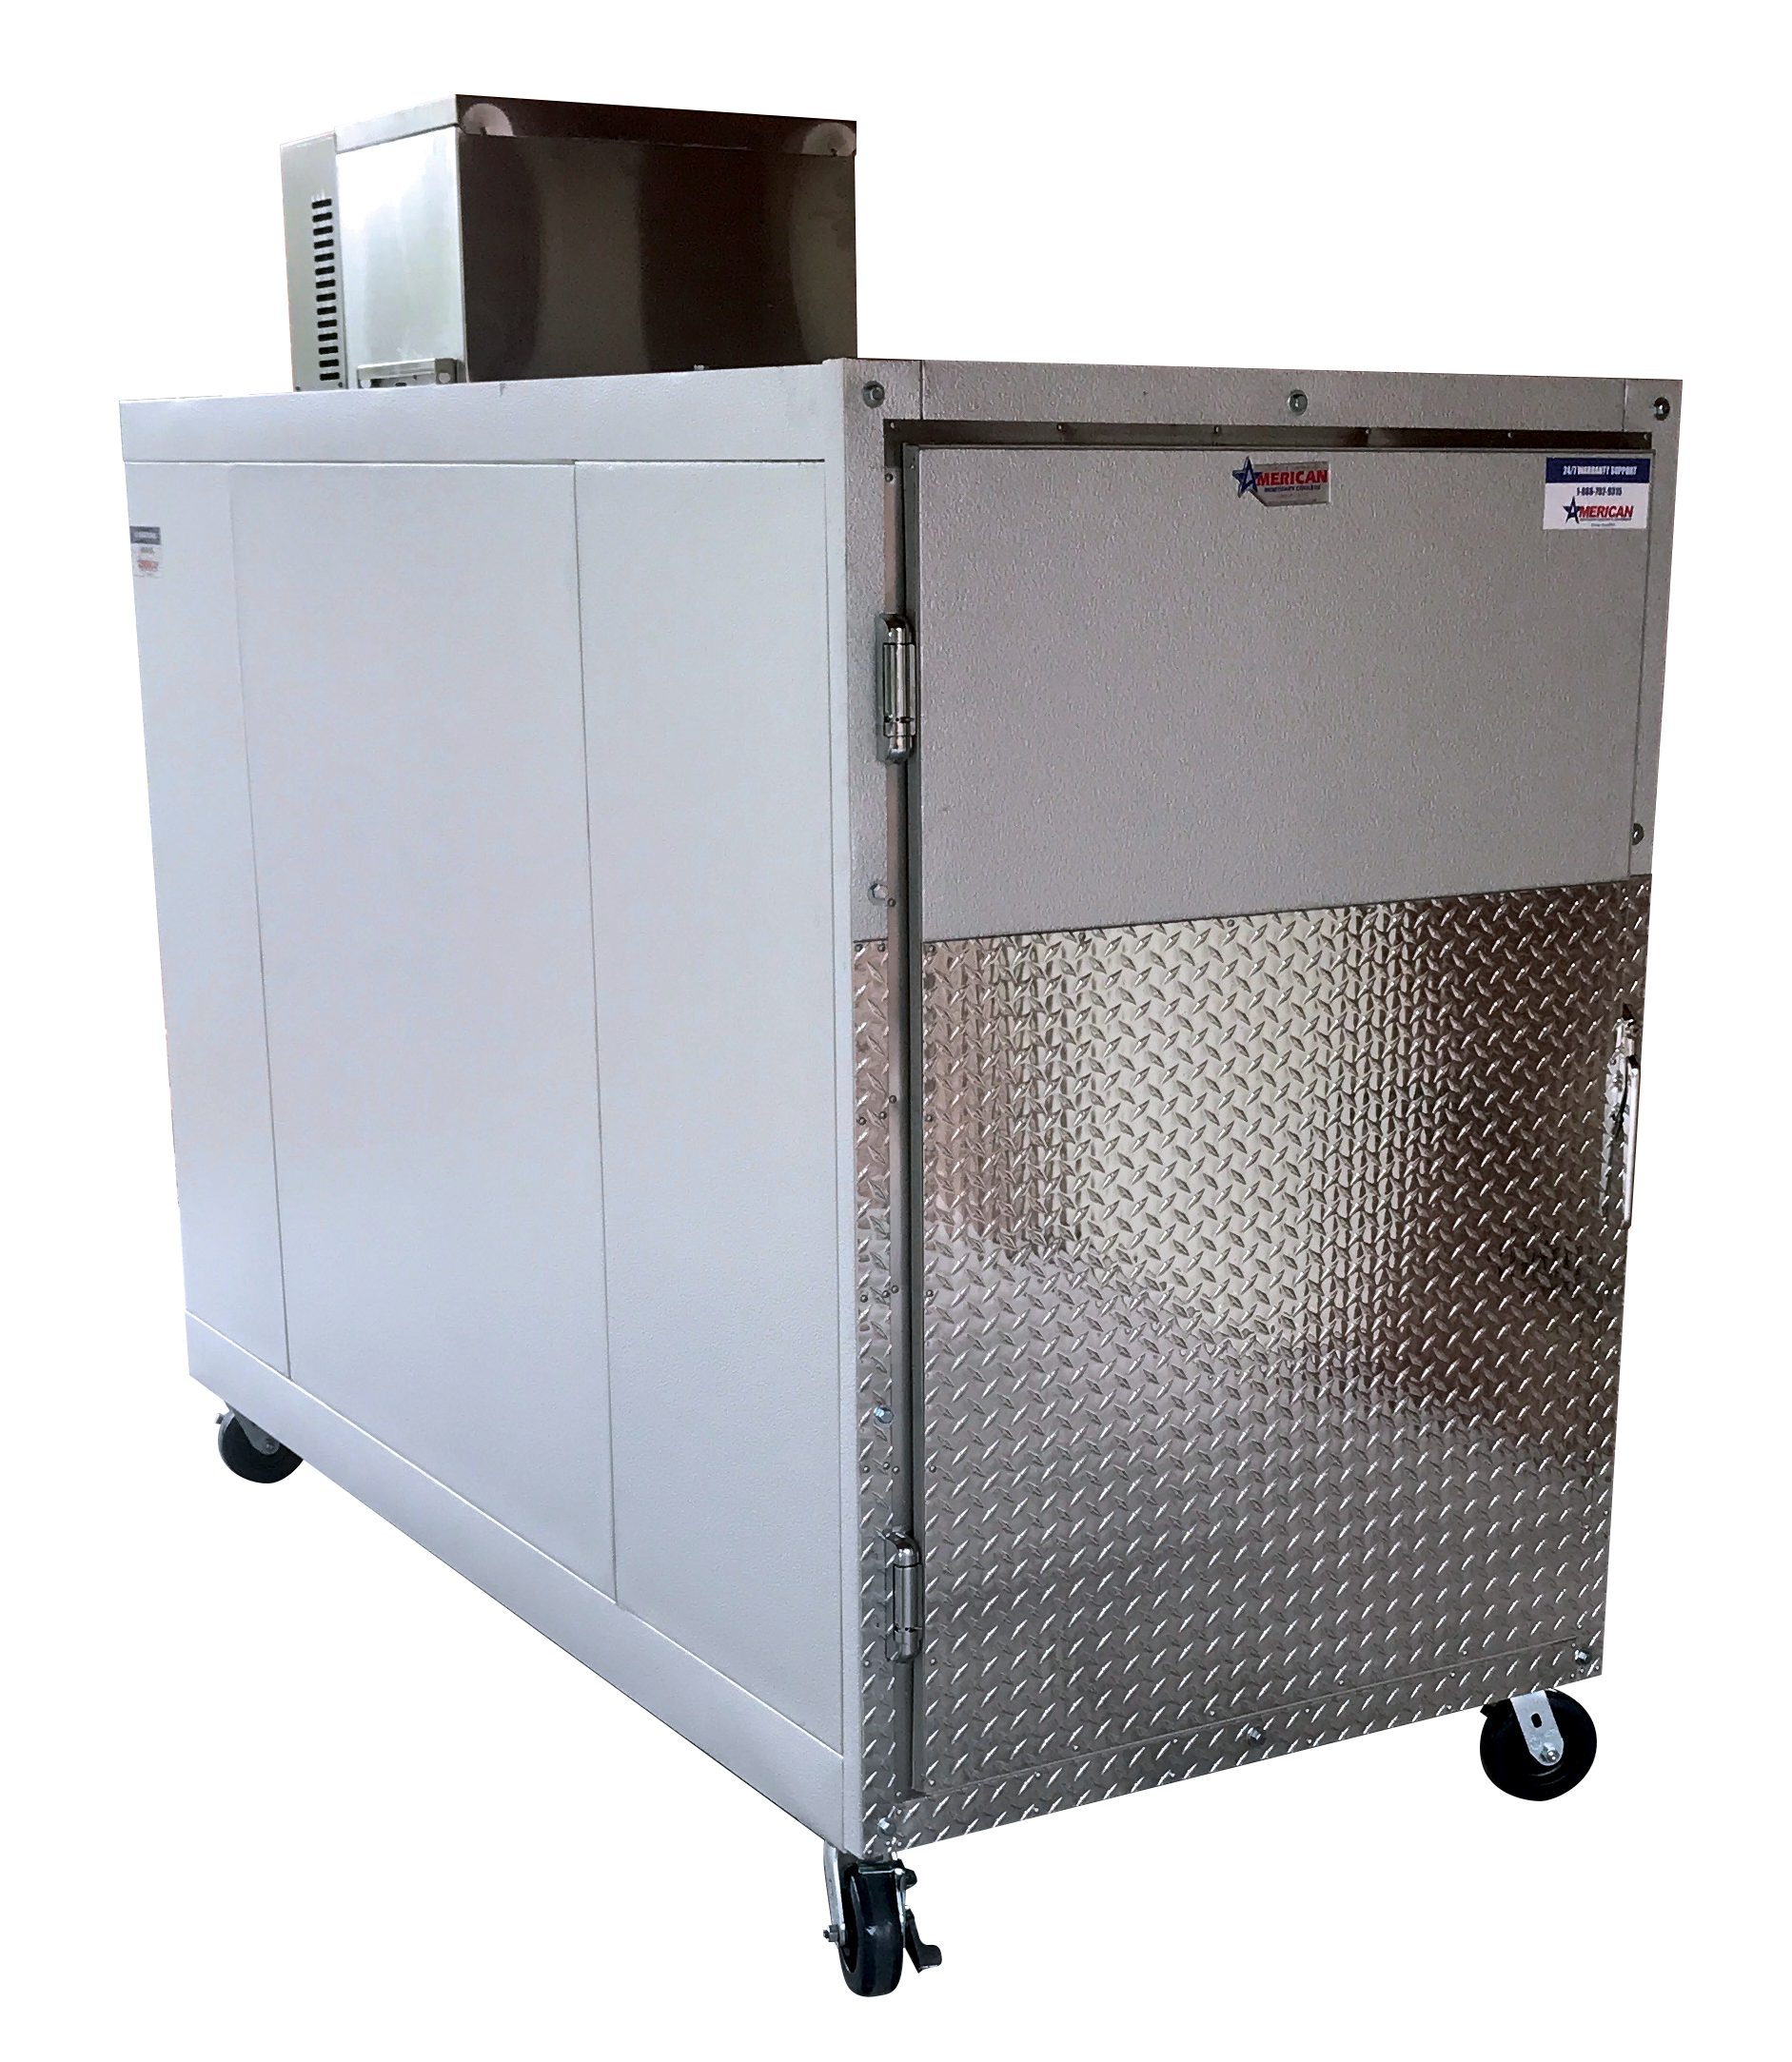 3 Body Mortuary Freezer from American Mortuary Coolers